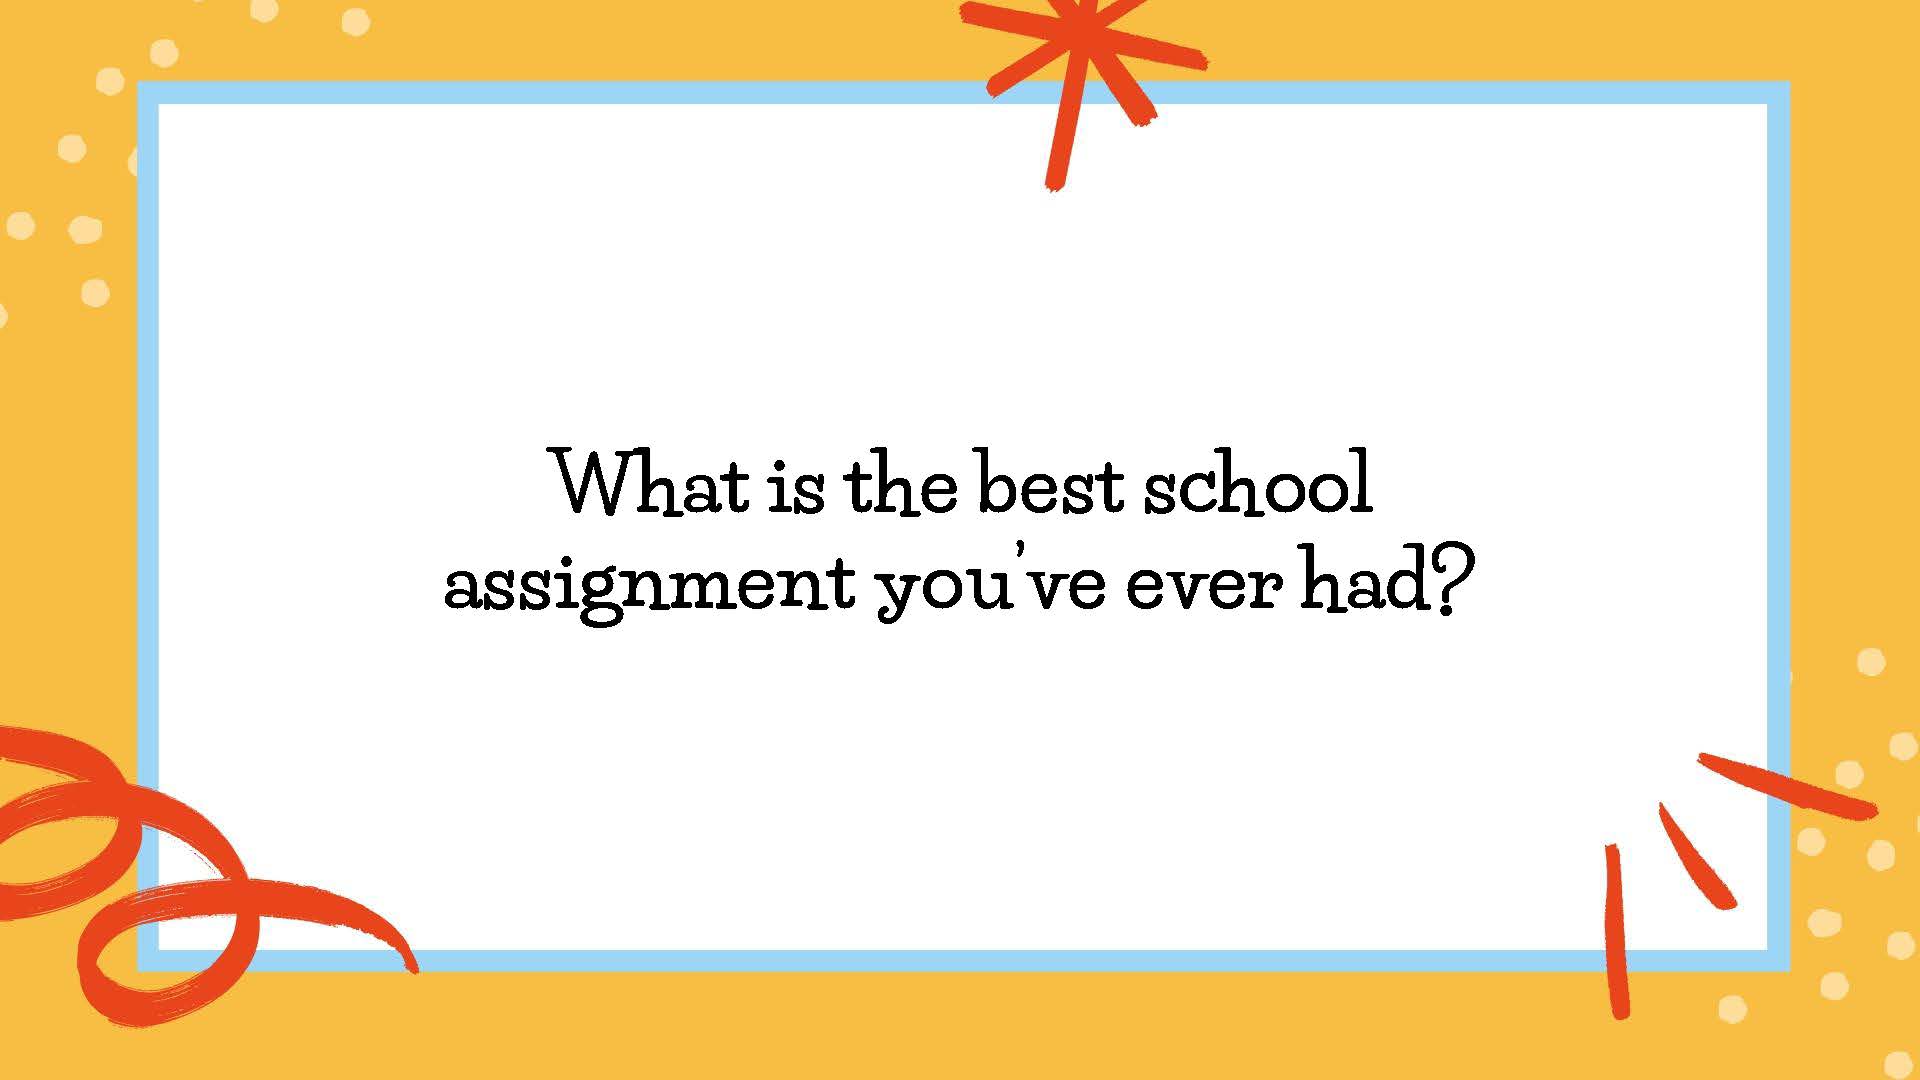 What is the best school assignment you’ve ever had?